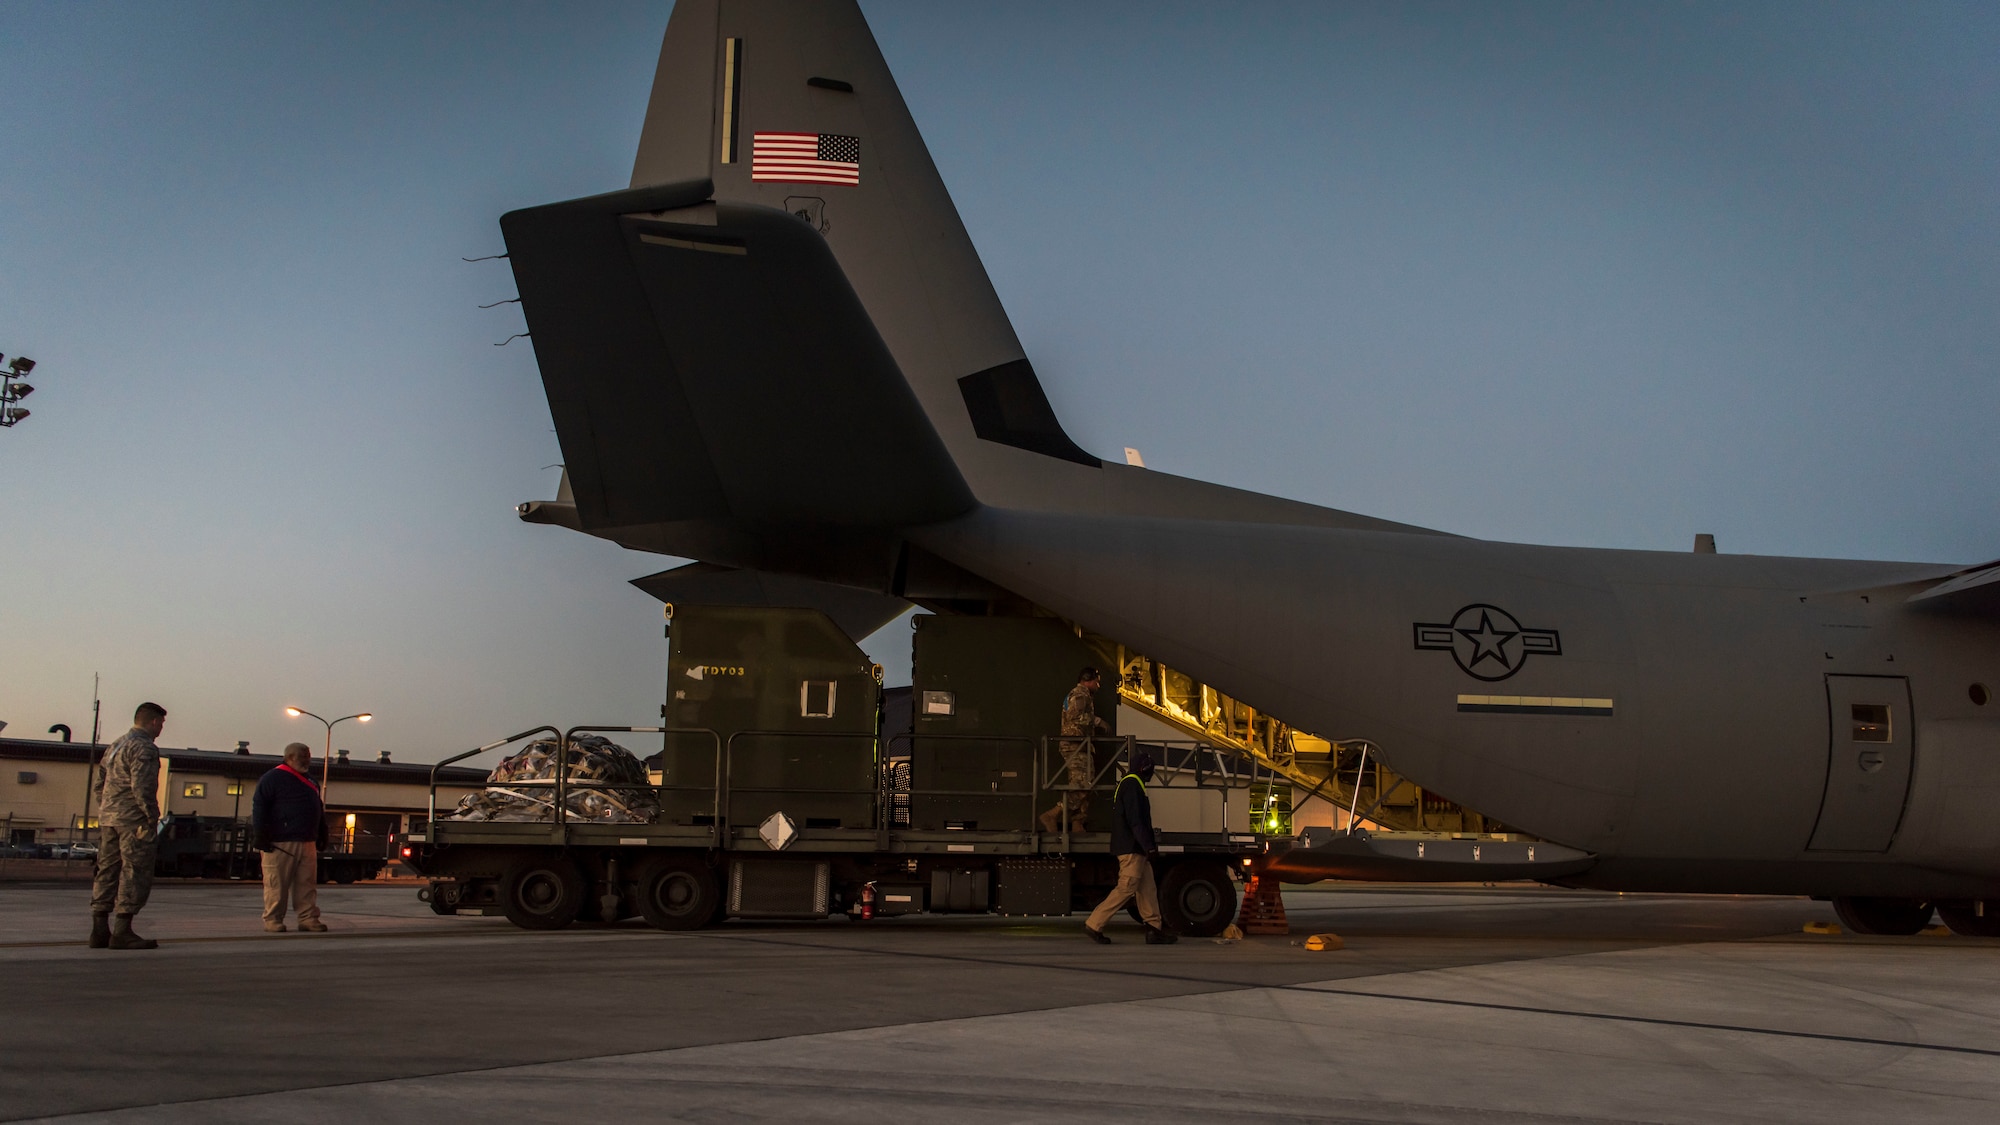 Loading cargo into the belly of a Herc